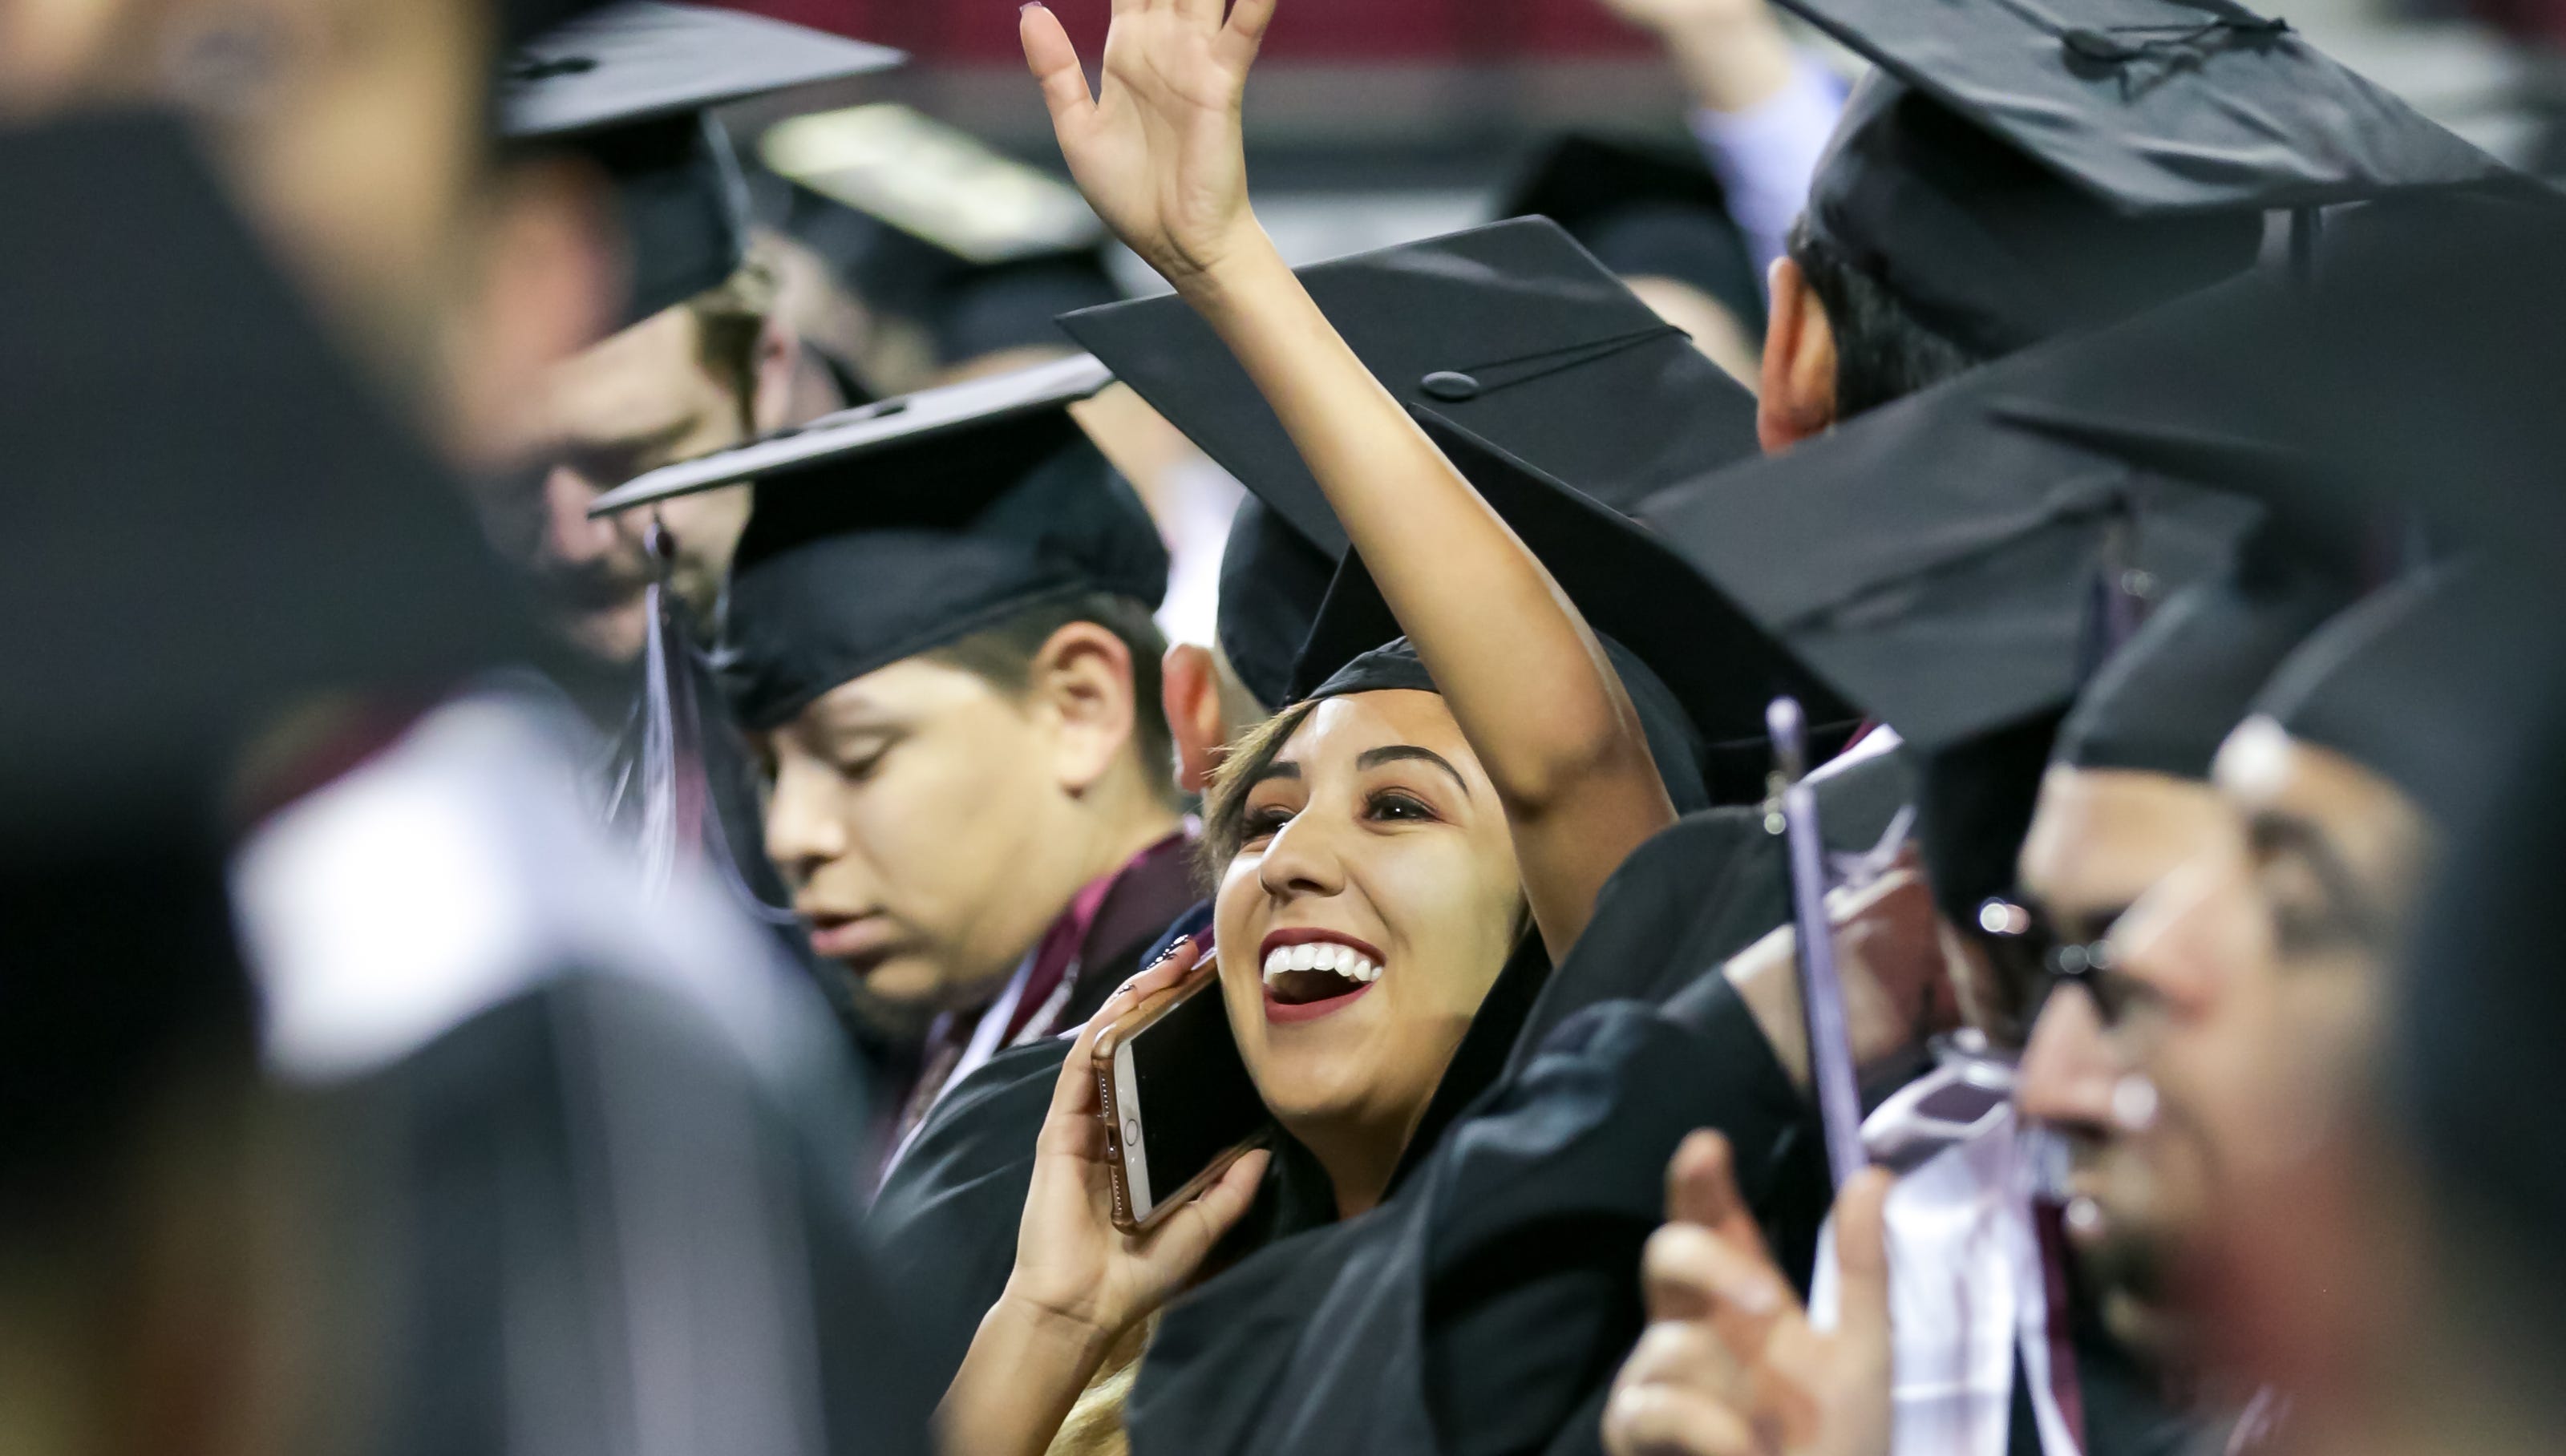 NMSU fall commencement graduates 1,200 students